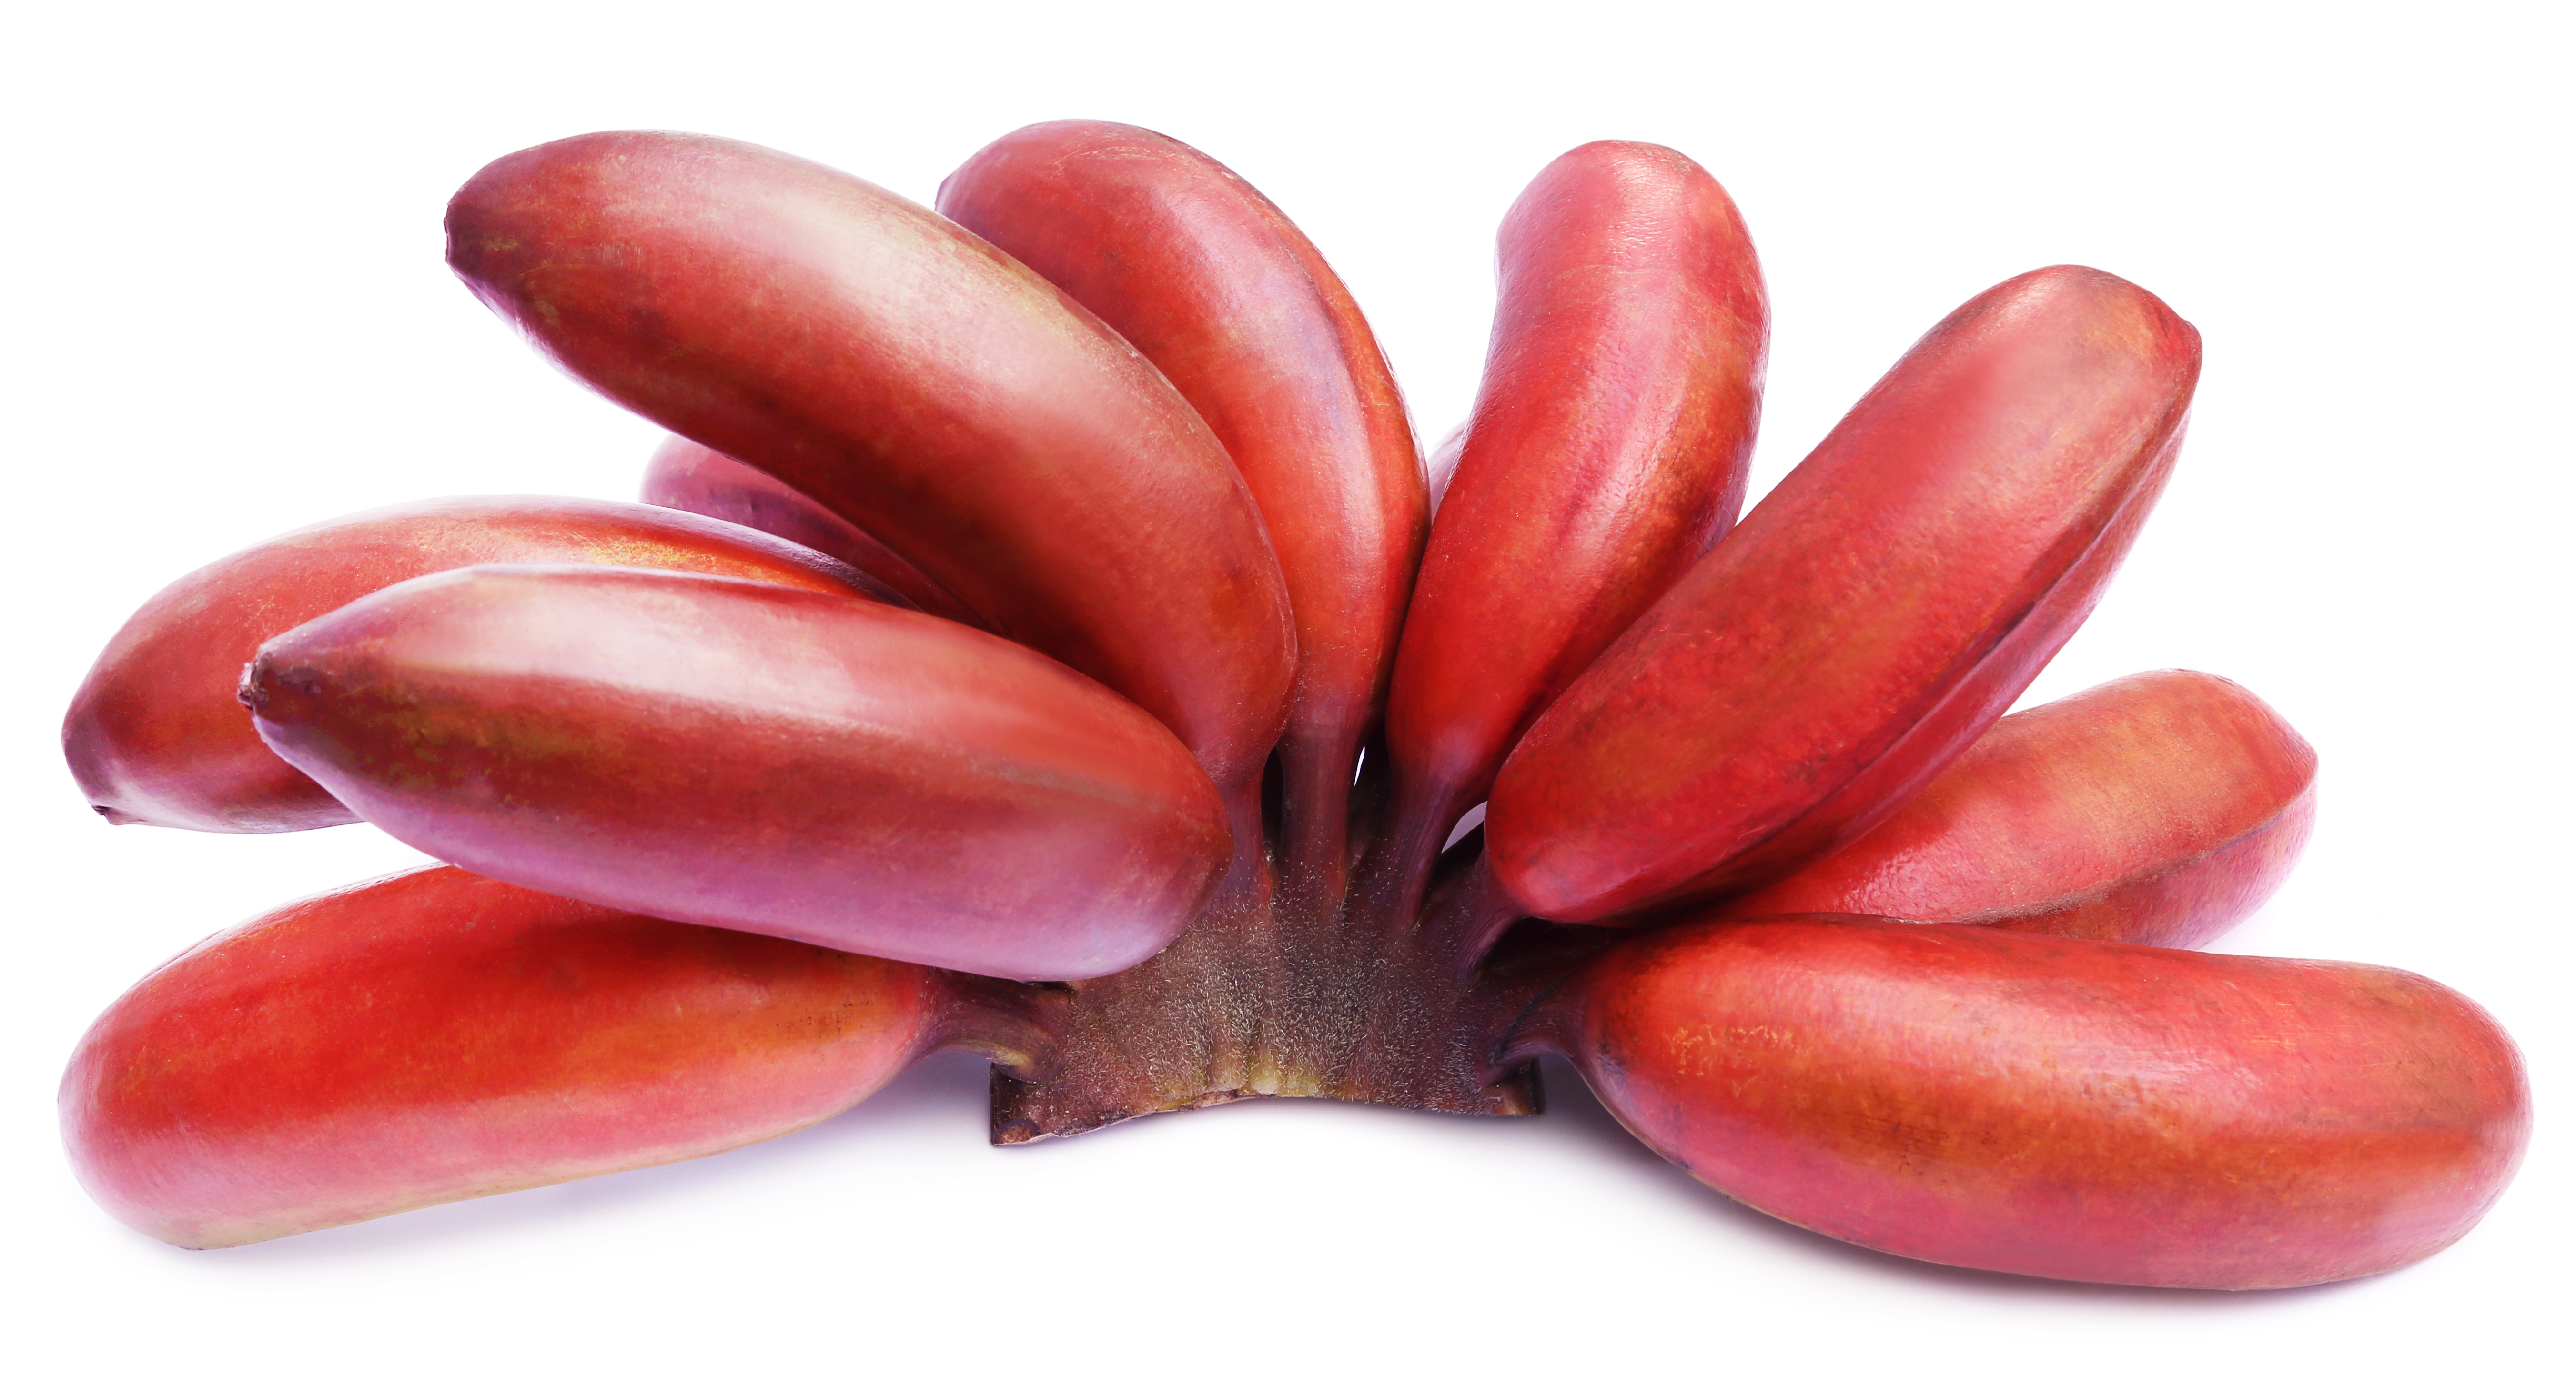 Are Red Bananas for Real?